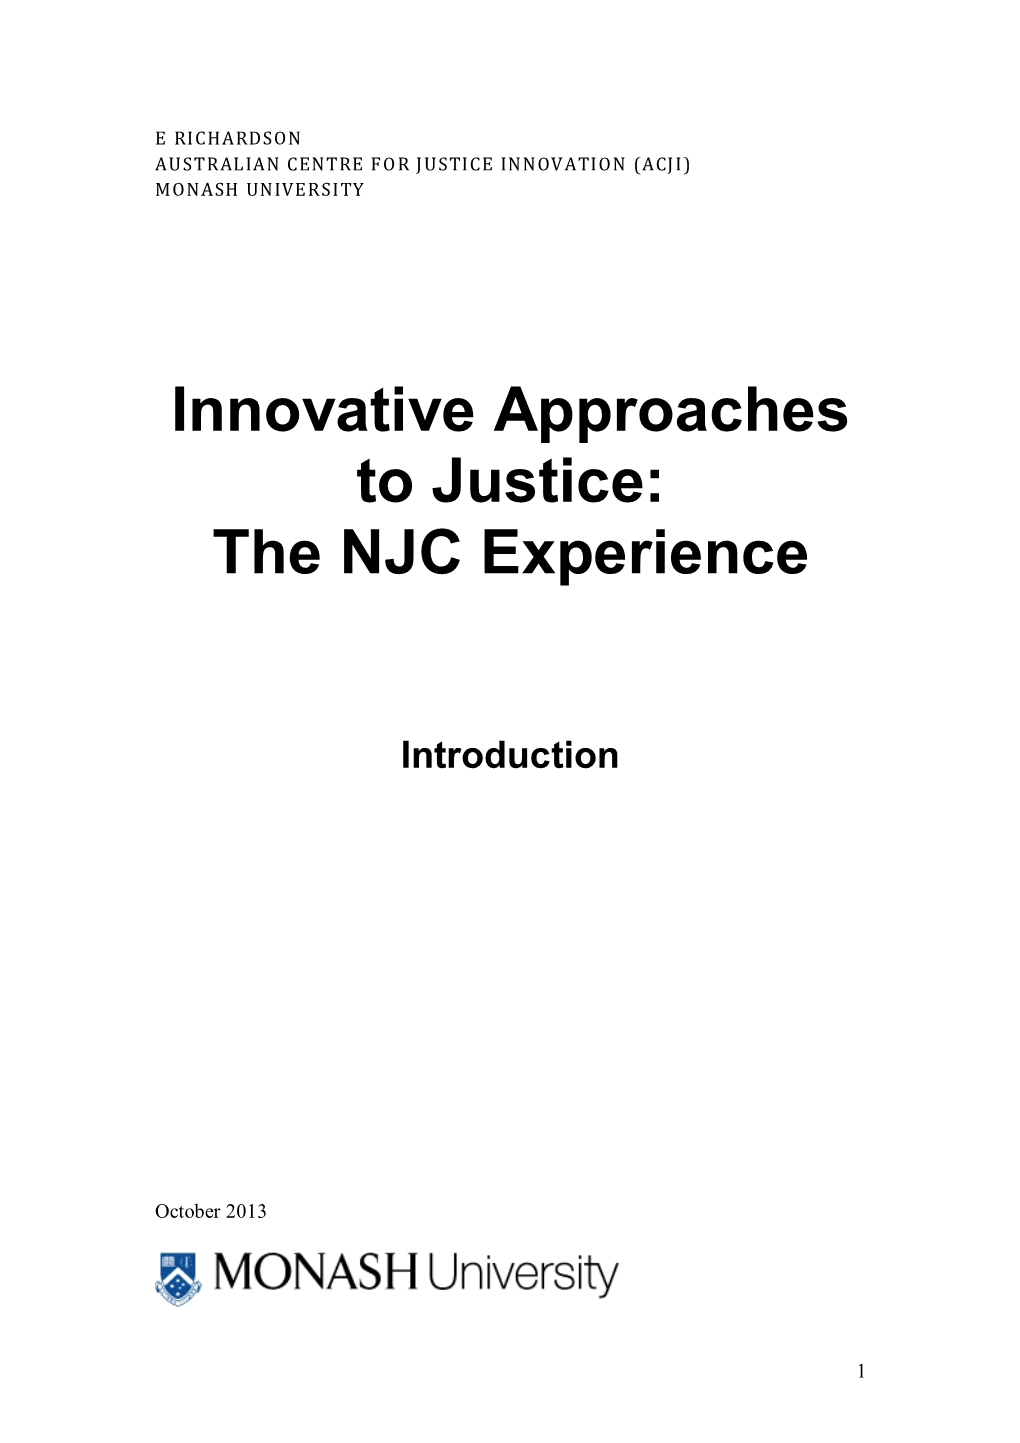 Innovative Approaches to Justice: the NJC Experience